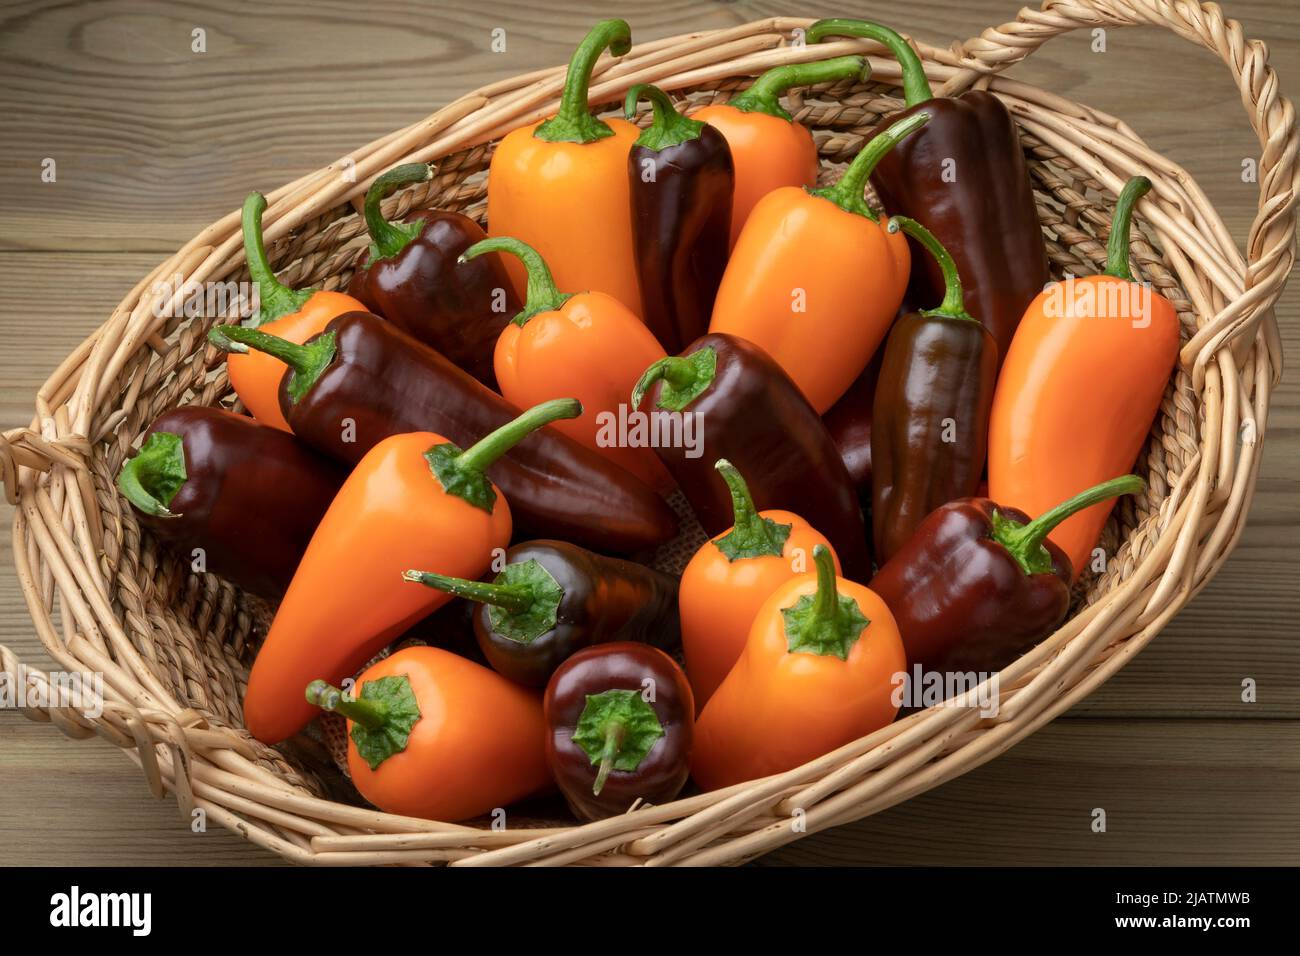 Basket with whole fresh orange and chocolate mini pointed bell peppers close up on wooden background Stock Photo